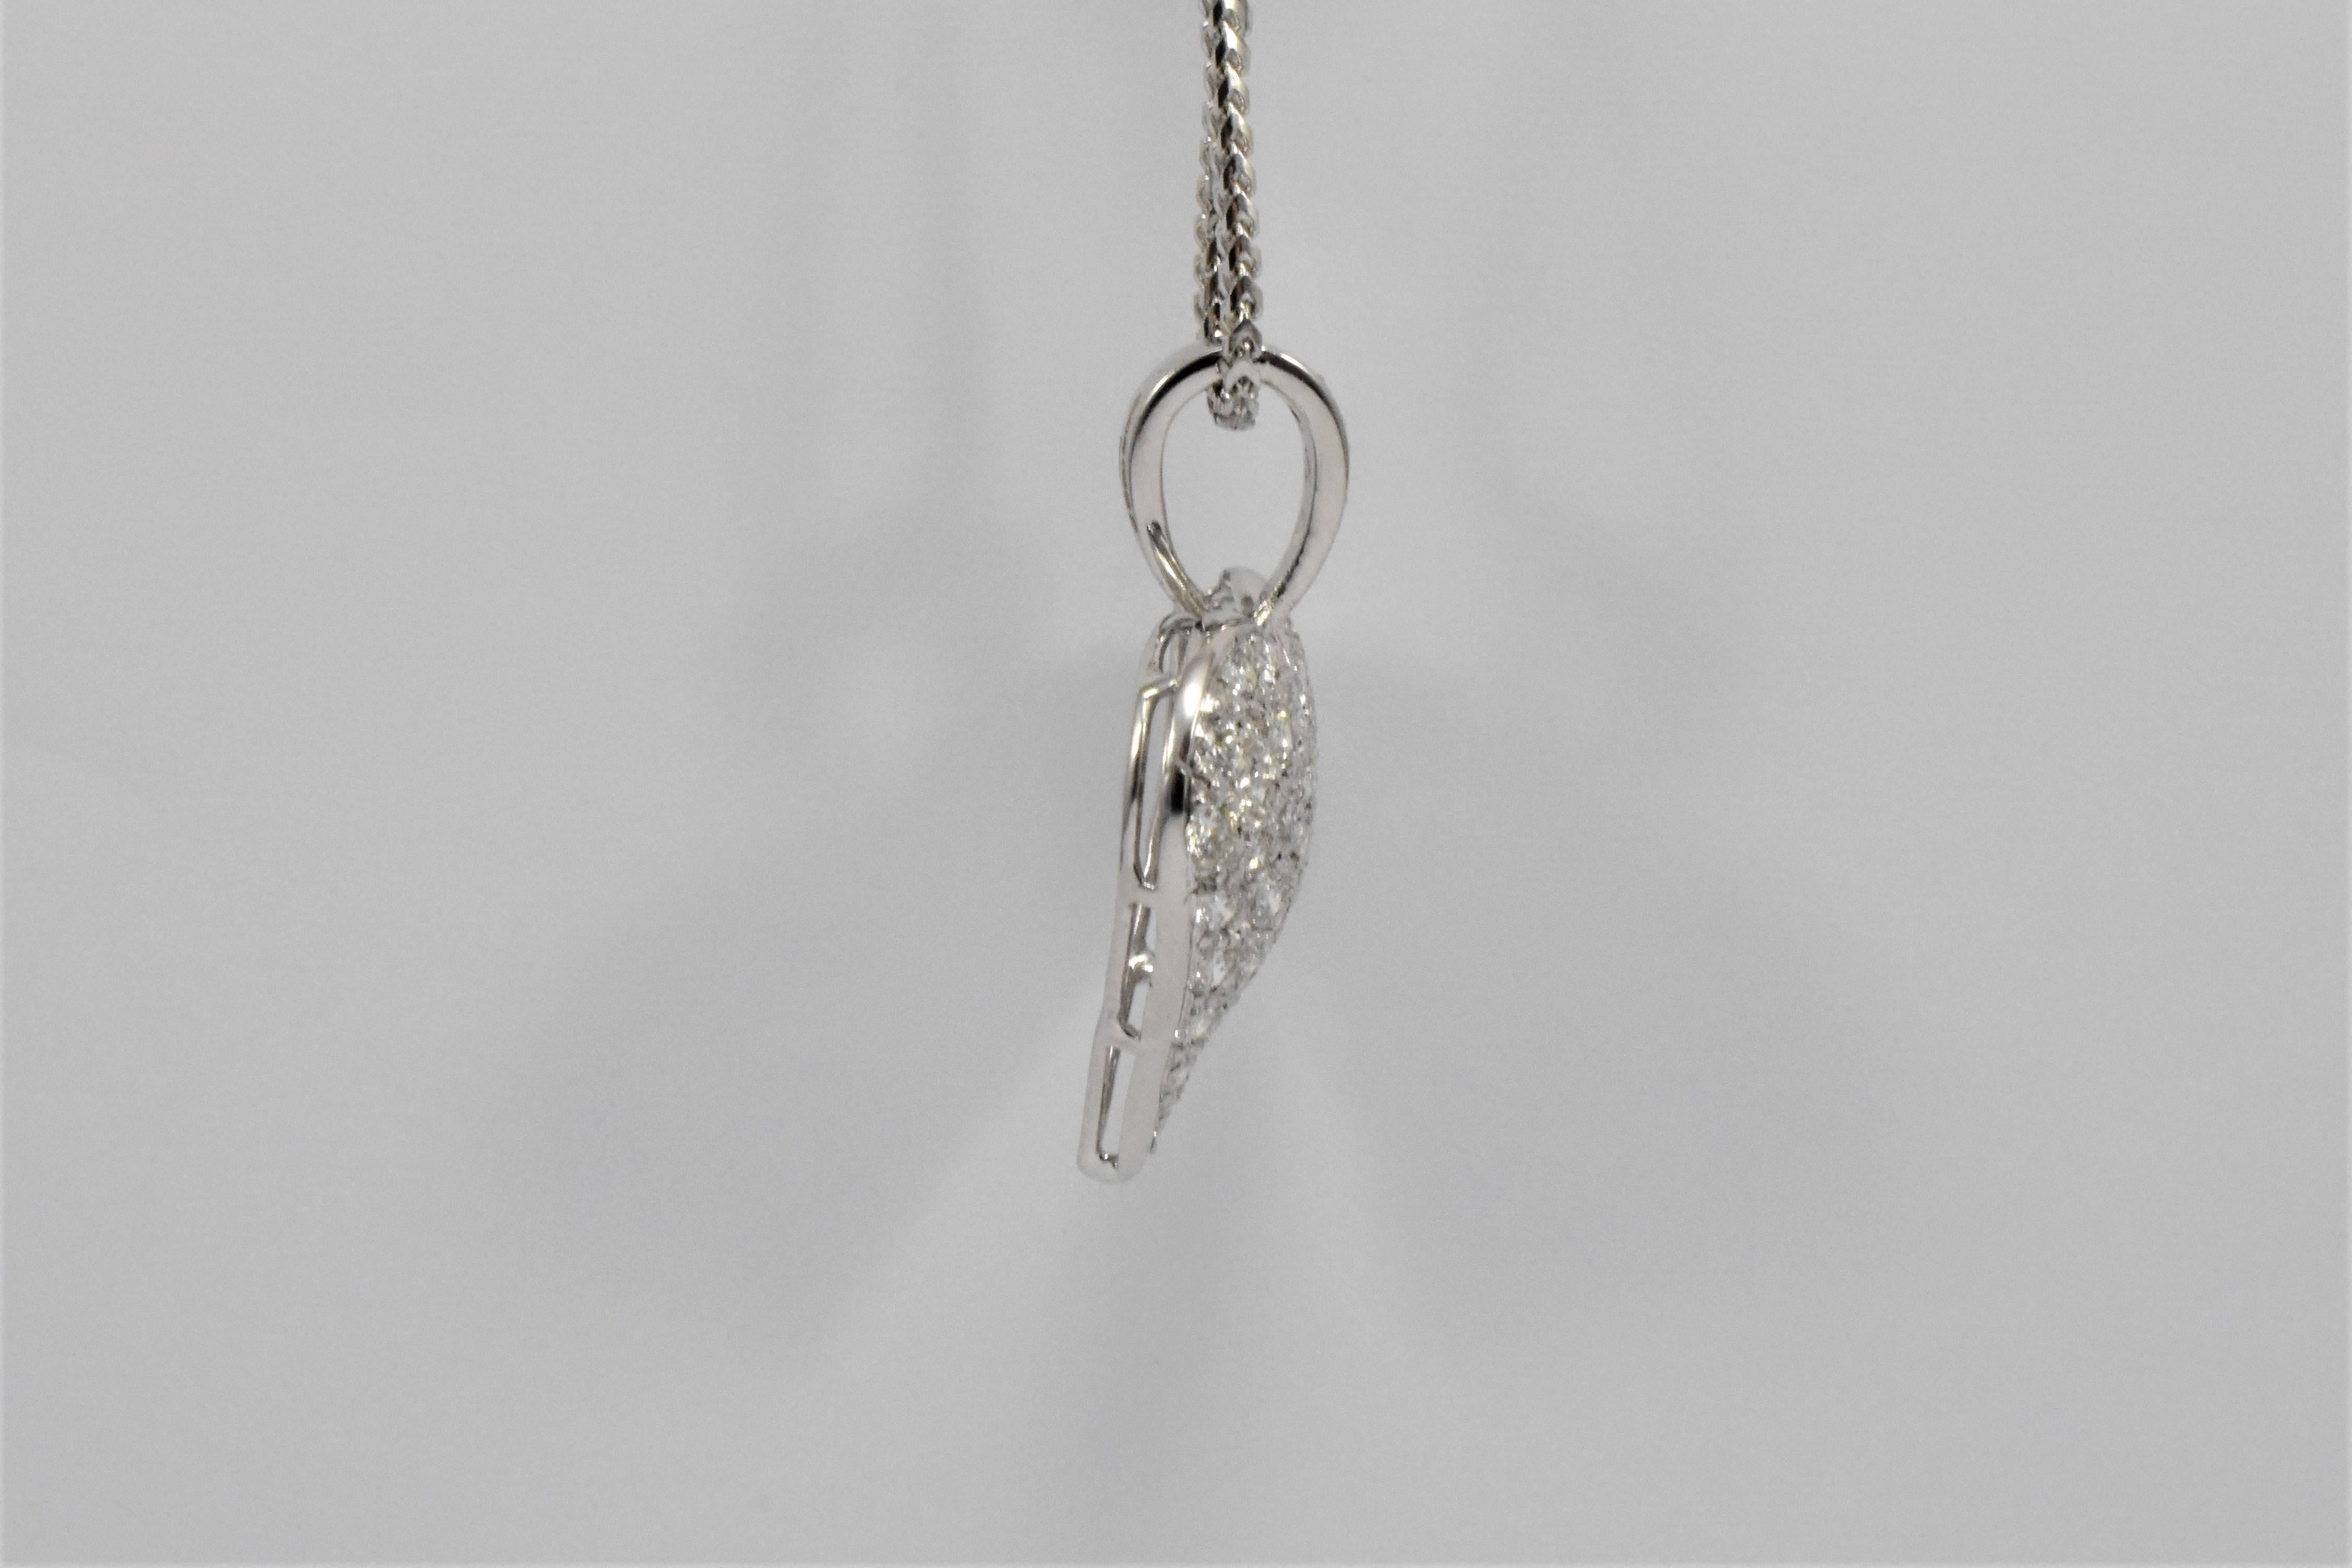 Daou Diamond 18K White Gold Full Heart Pendant Necklace In New Condition For Sale In London, EMEA - British Isles